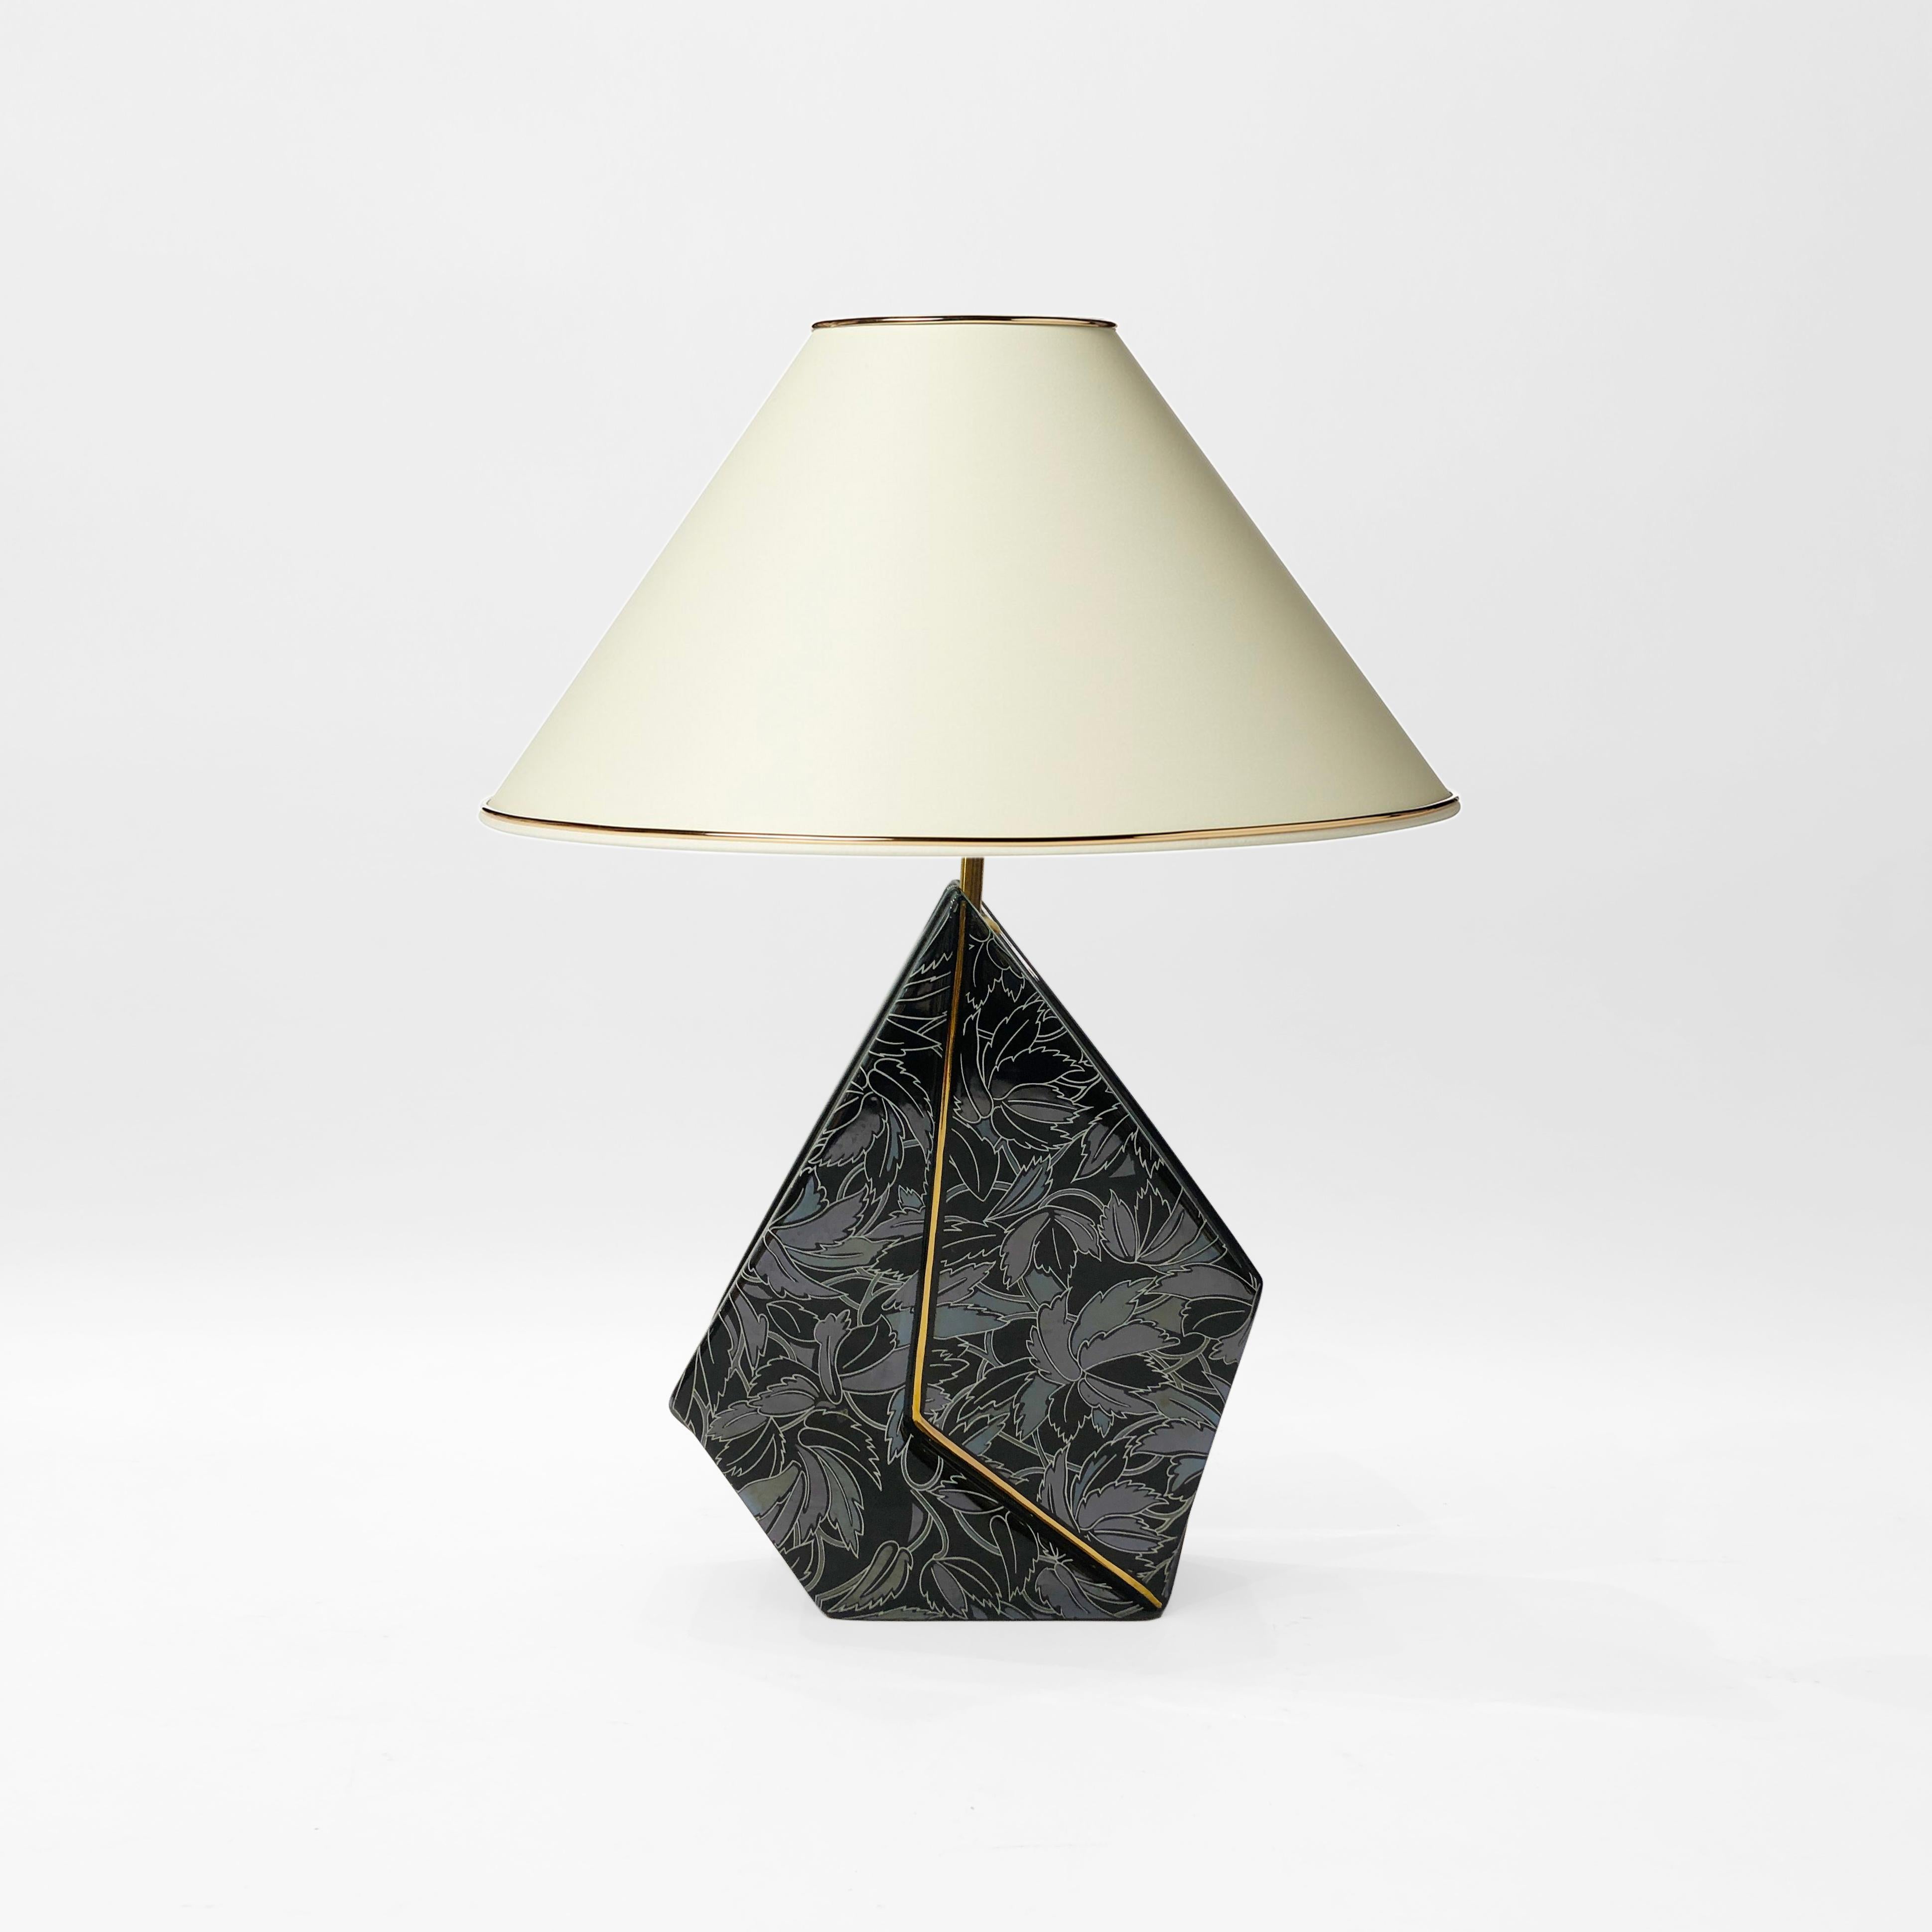 A geometric table lamp, made of glazed ceramic, and finished with a leaf motif. An irregular pentagon, this piece features a jutting brass strip running through the middle to the bulb fitting, creating a distinct left and right to the base. Each